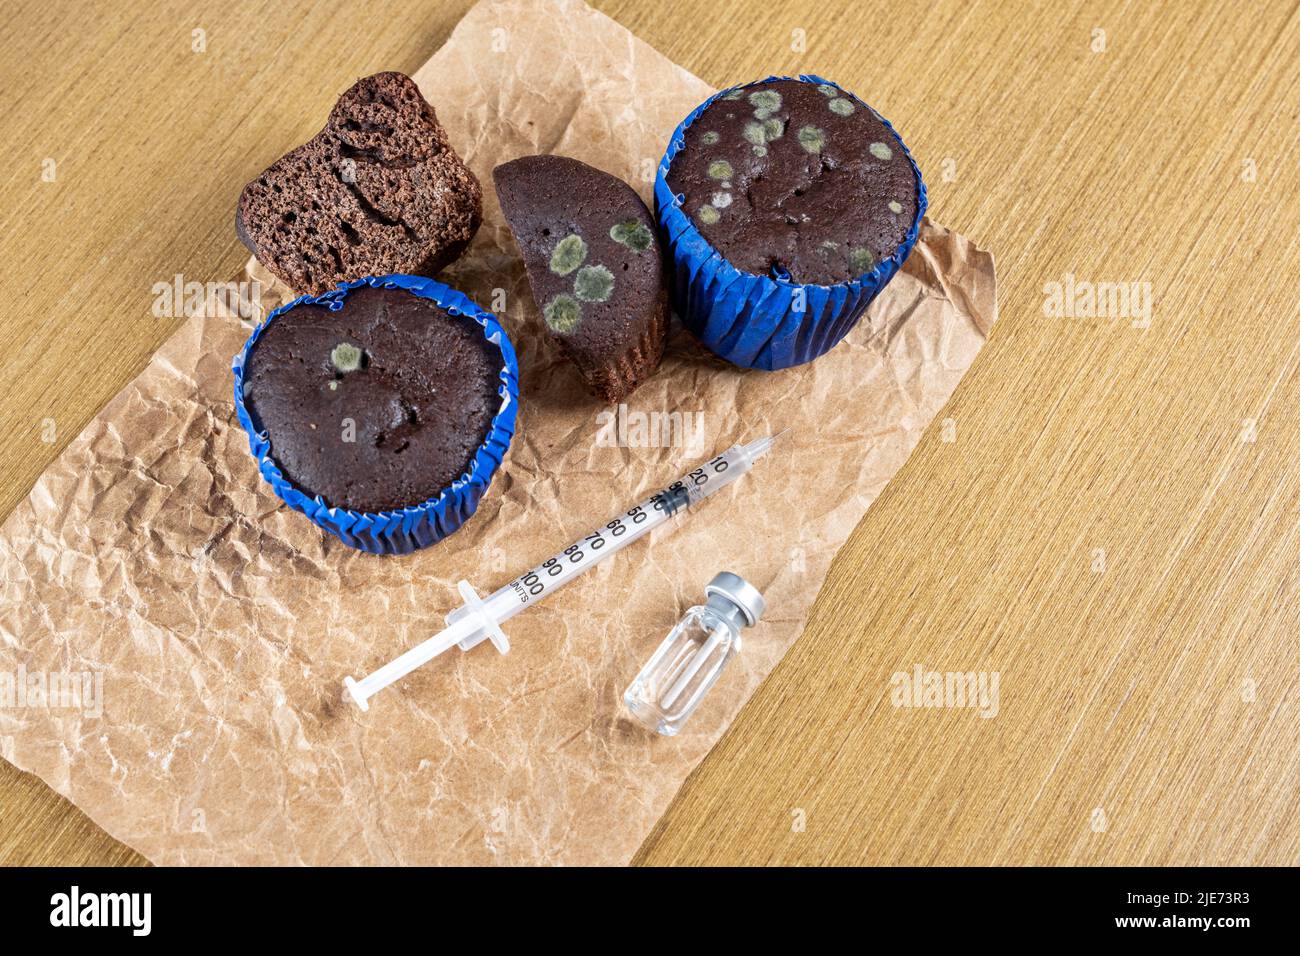 Syringe with insulin next to moldy muffins and ampoule. Stock Photo